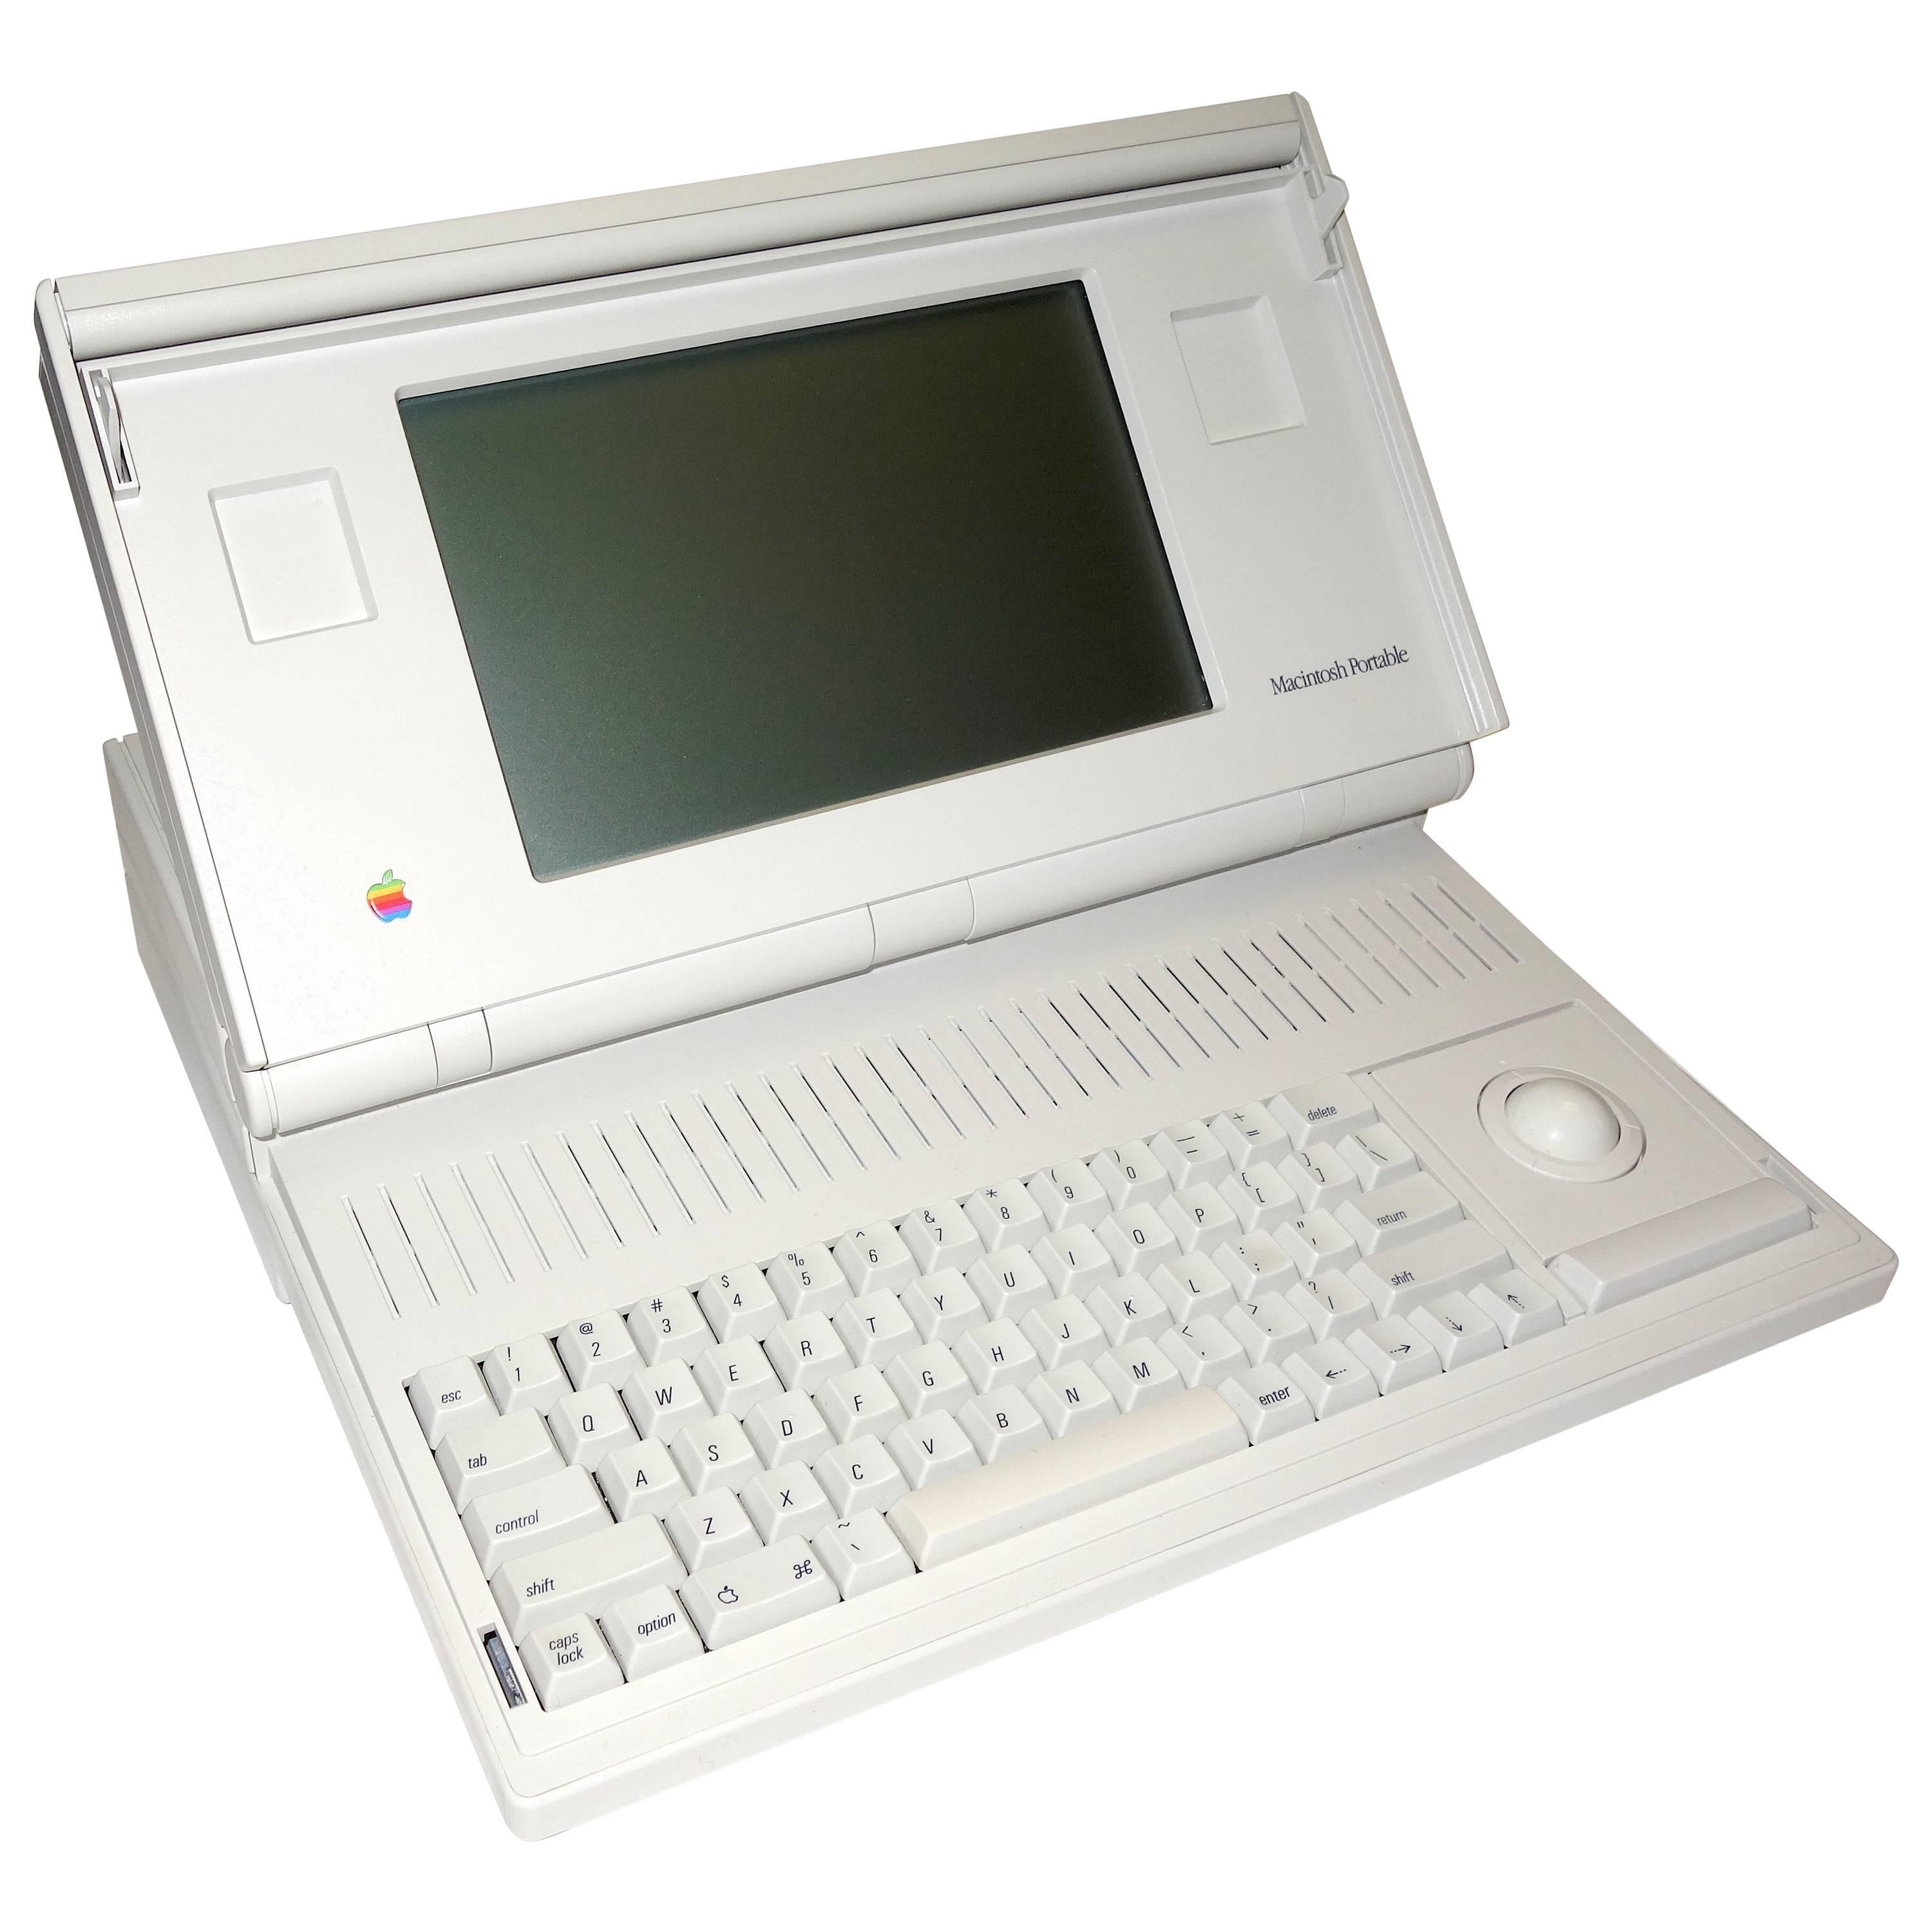 First Macintosh Portable Computer as New Complete Designer Icon For Sale